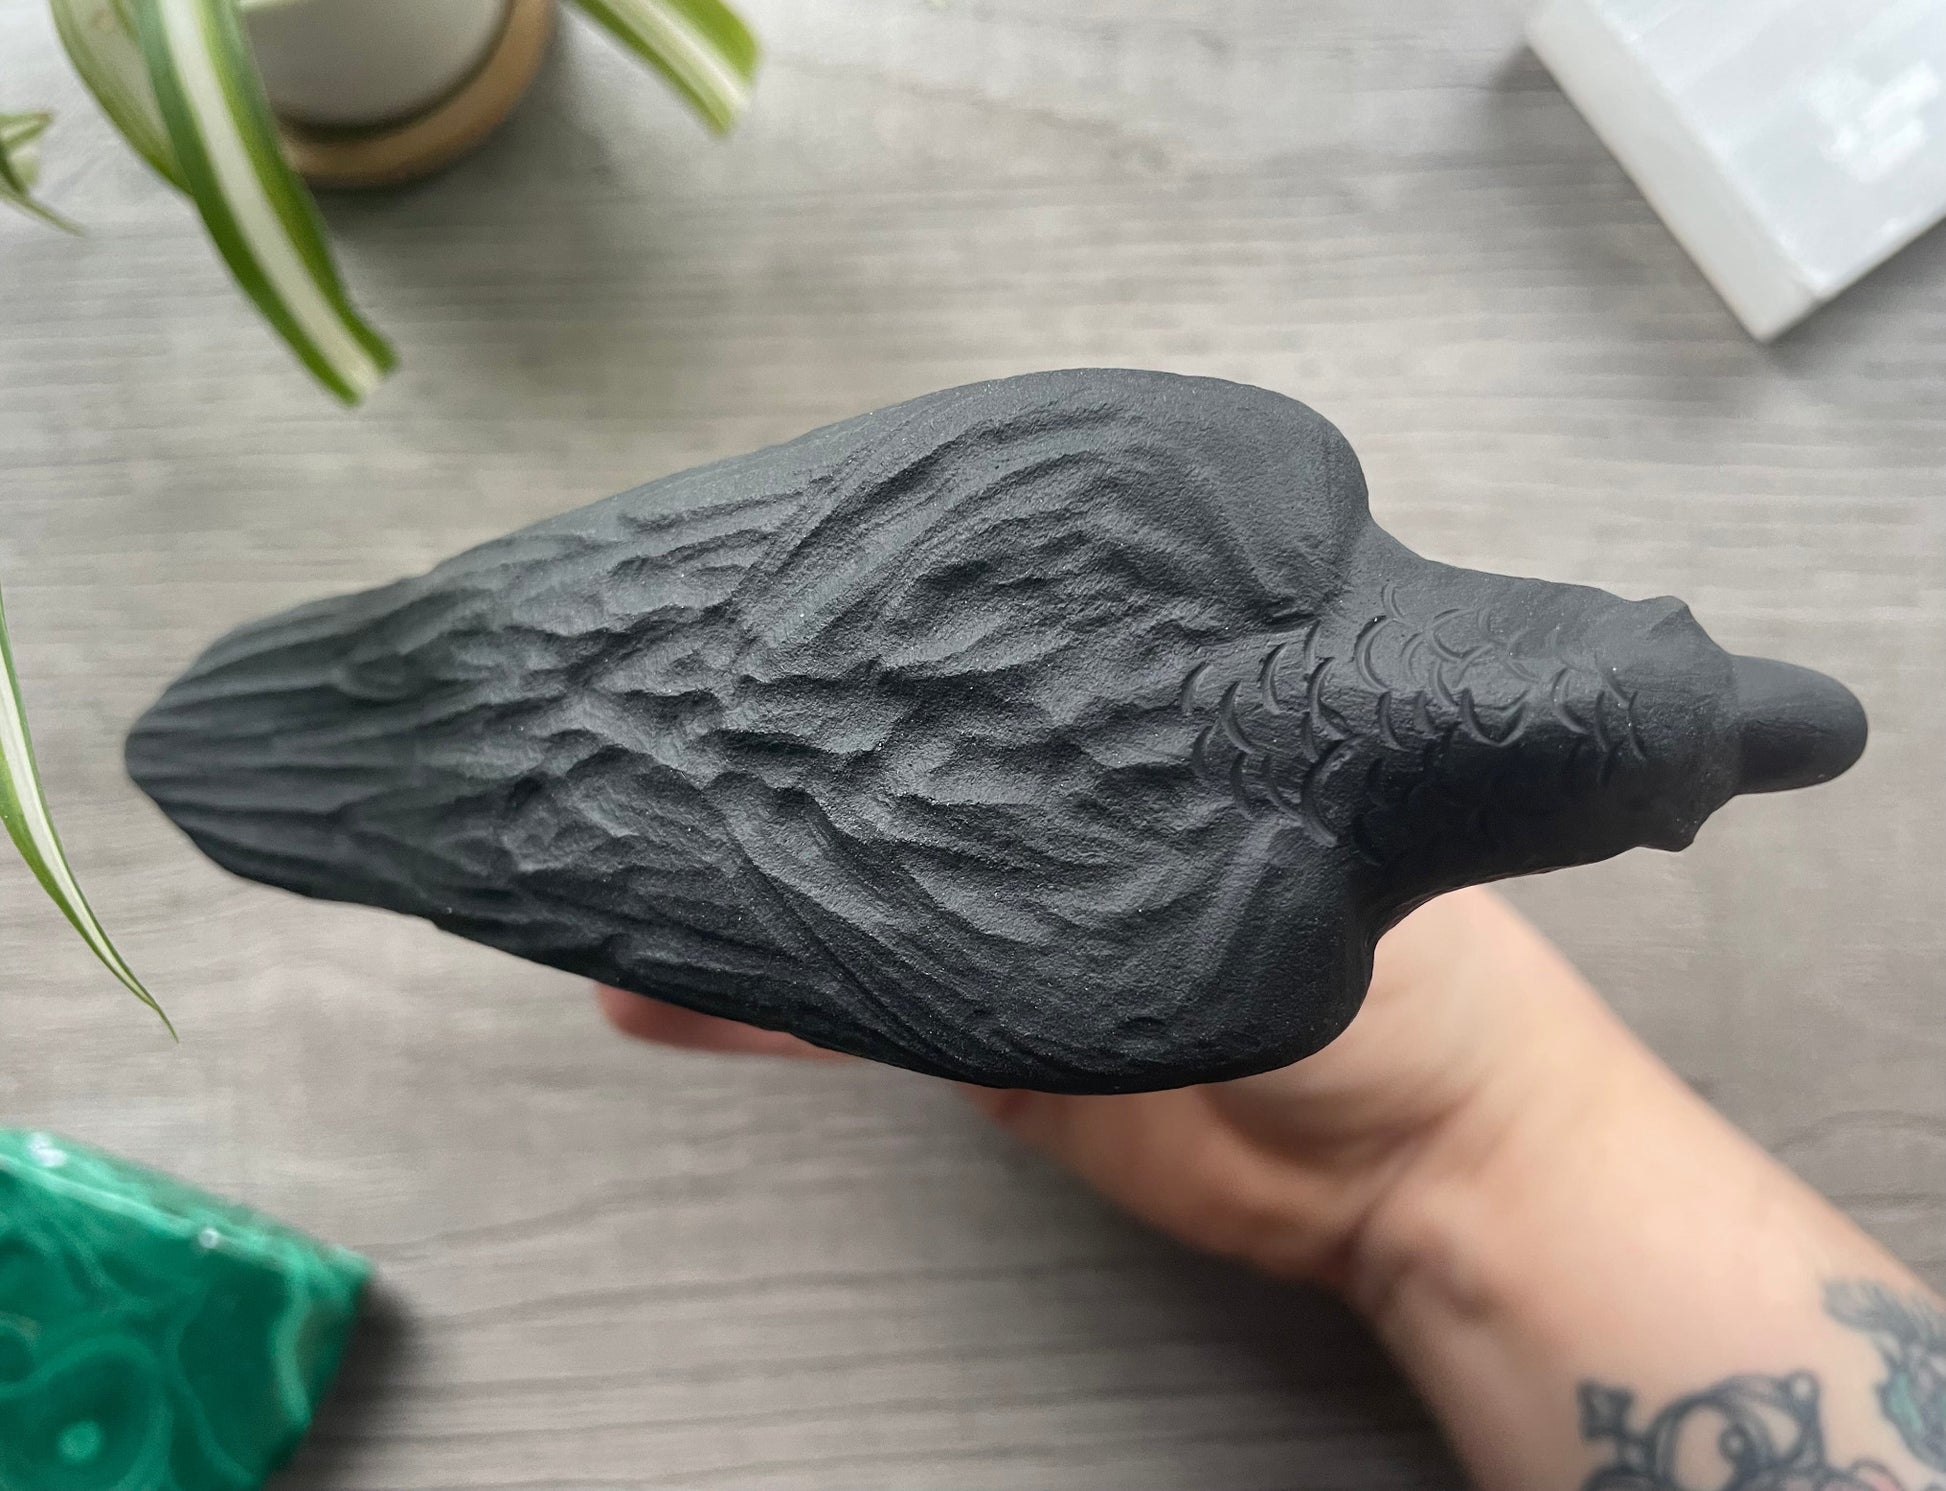 Pictured is a raven carved out of black obsidian.